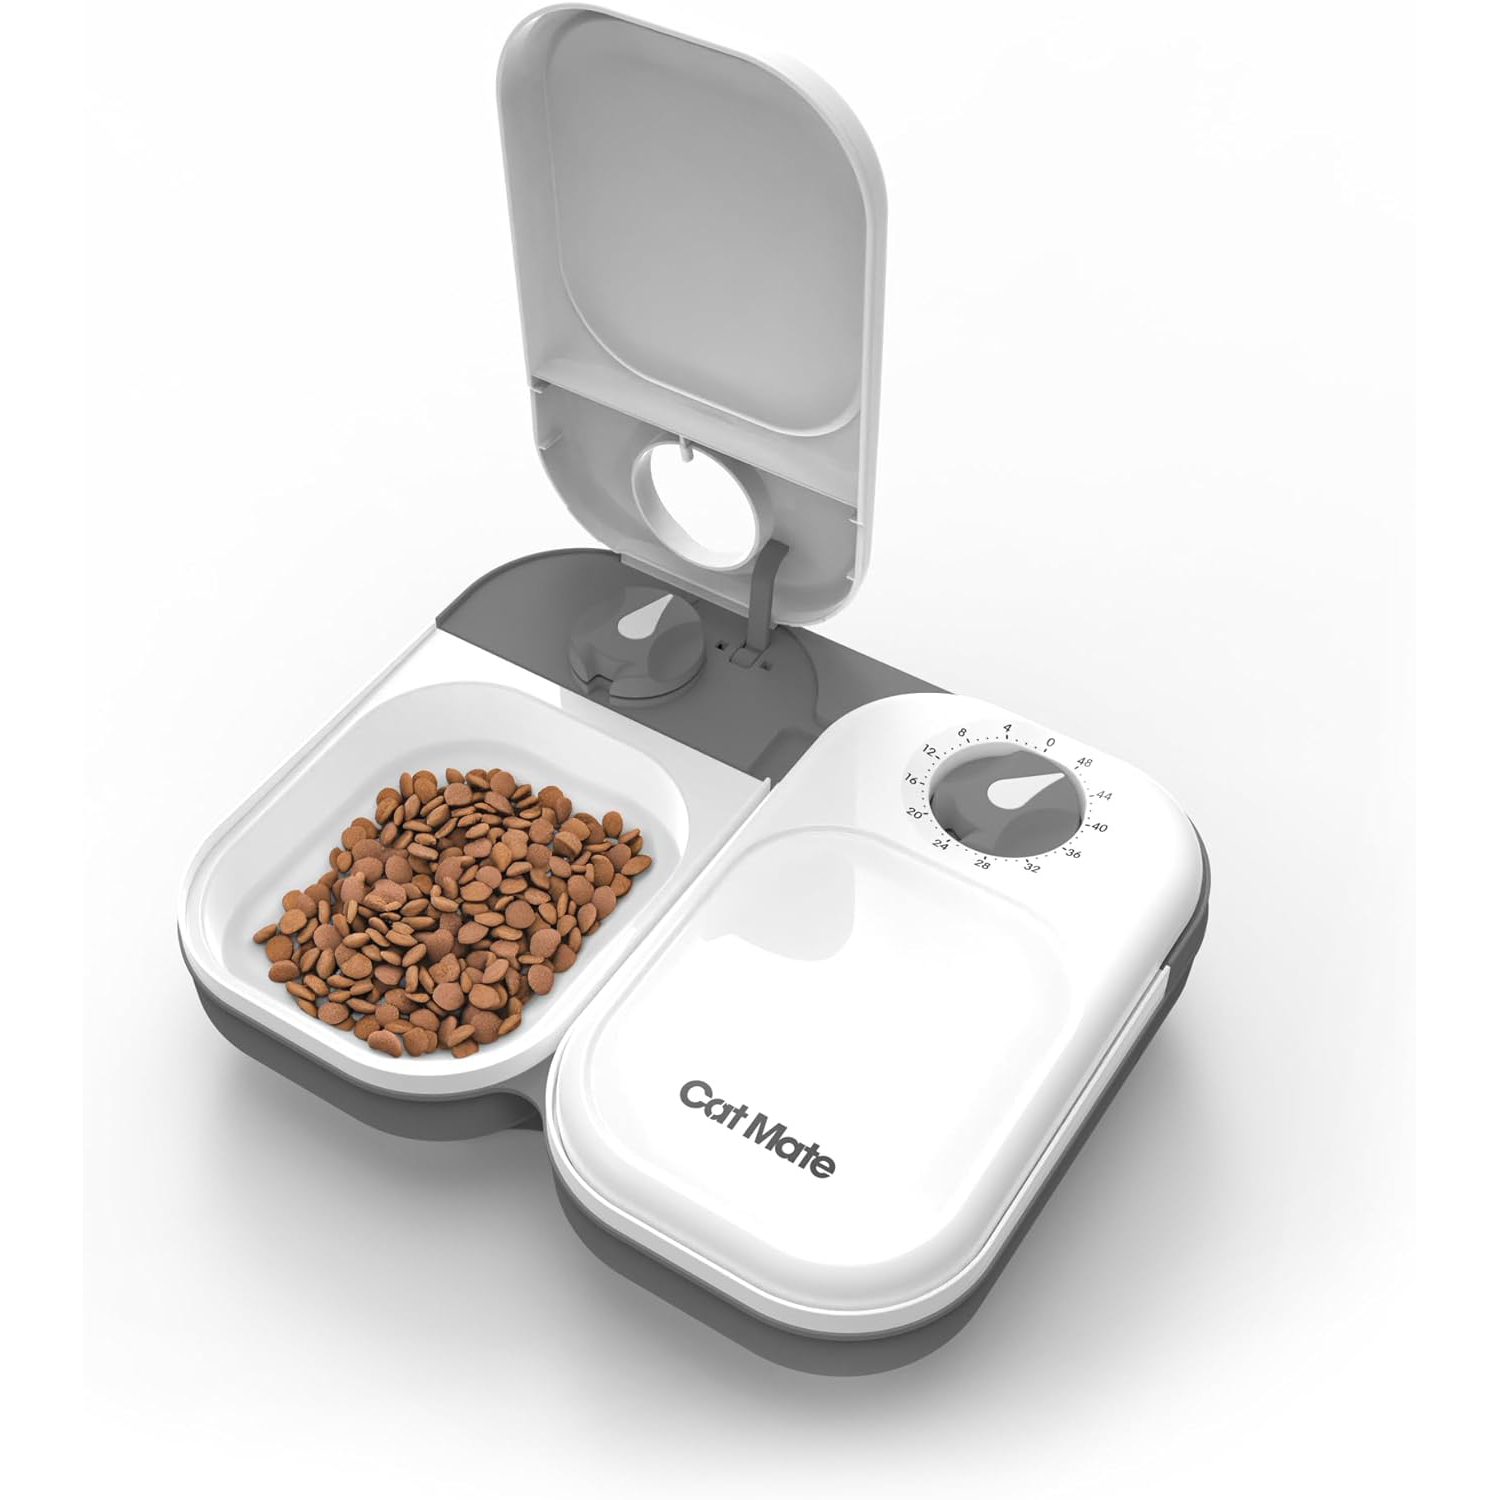 Cat Mate C200 2 Meal Automatic Pet Feeder with Timer and Ice Pack For Cats And Small Dogs, For use with Wet and Dry Food